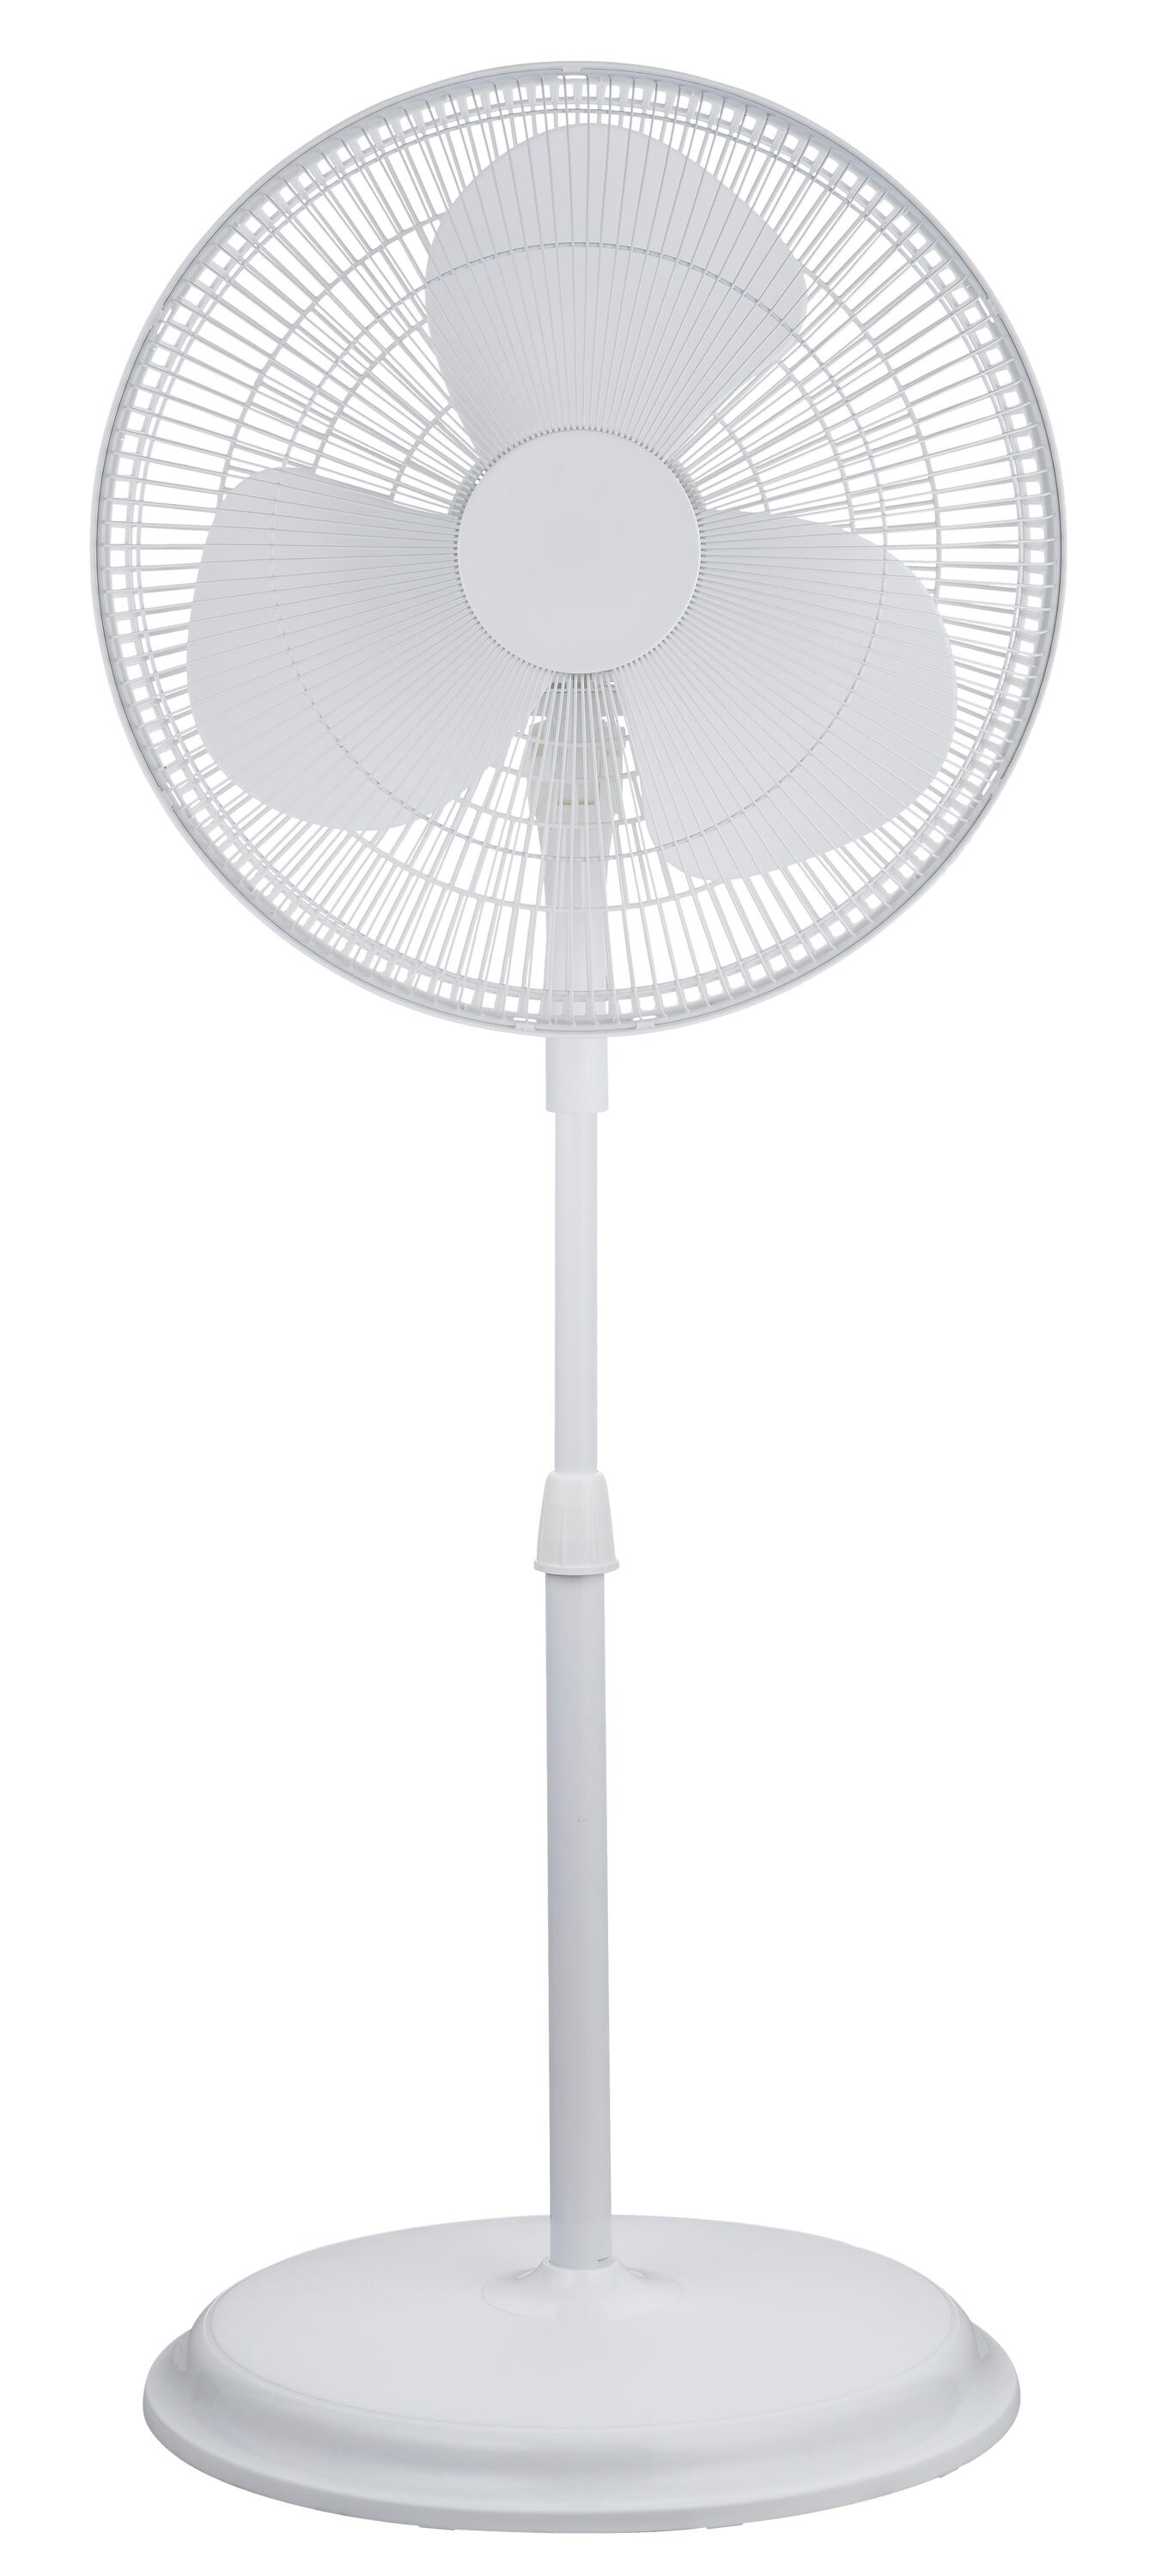 No/Brand Electrical 16-Inch Oscillating Pedestal Stand Fan 3 Settings